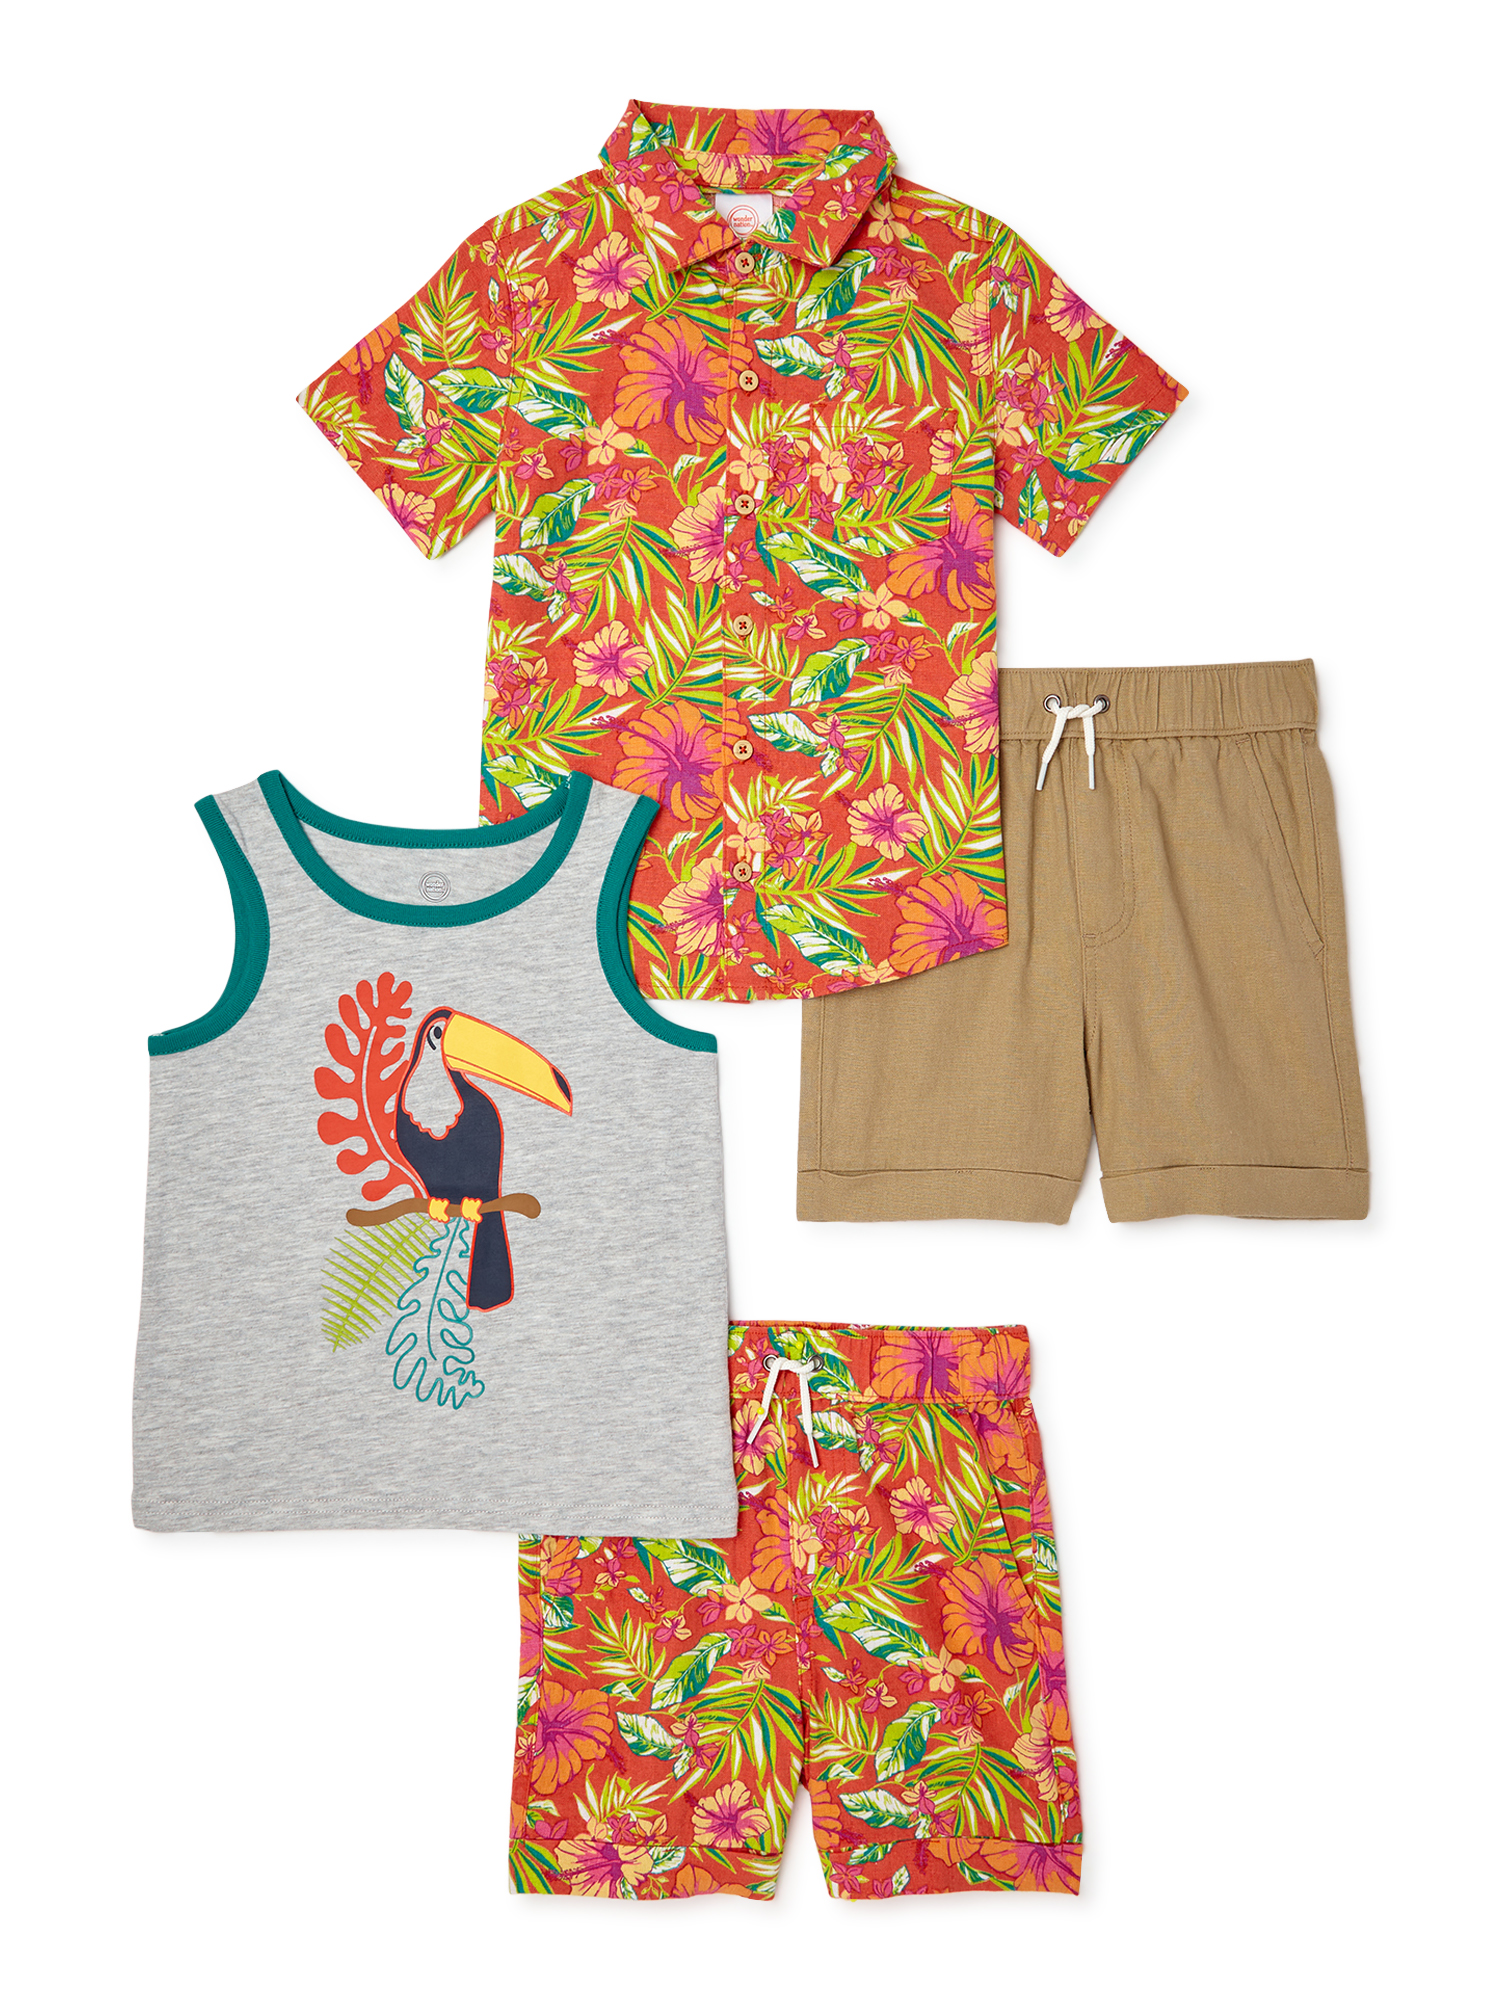 Wonder Nation Baby and Toddler Boy Woven Shirt, Tank, and Shorts Mix and Match Outfit Set, 4-Piece, Sizes 12M-5T - image 1 of 3